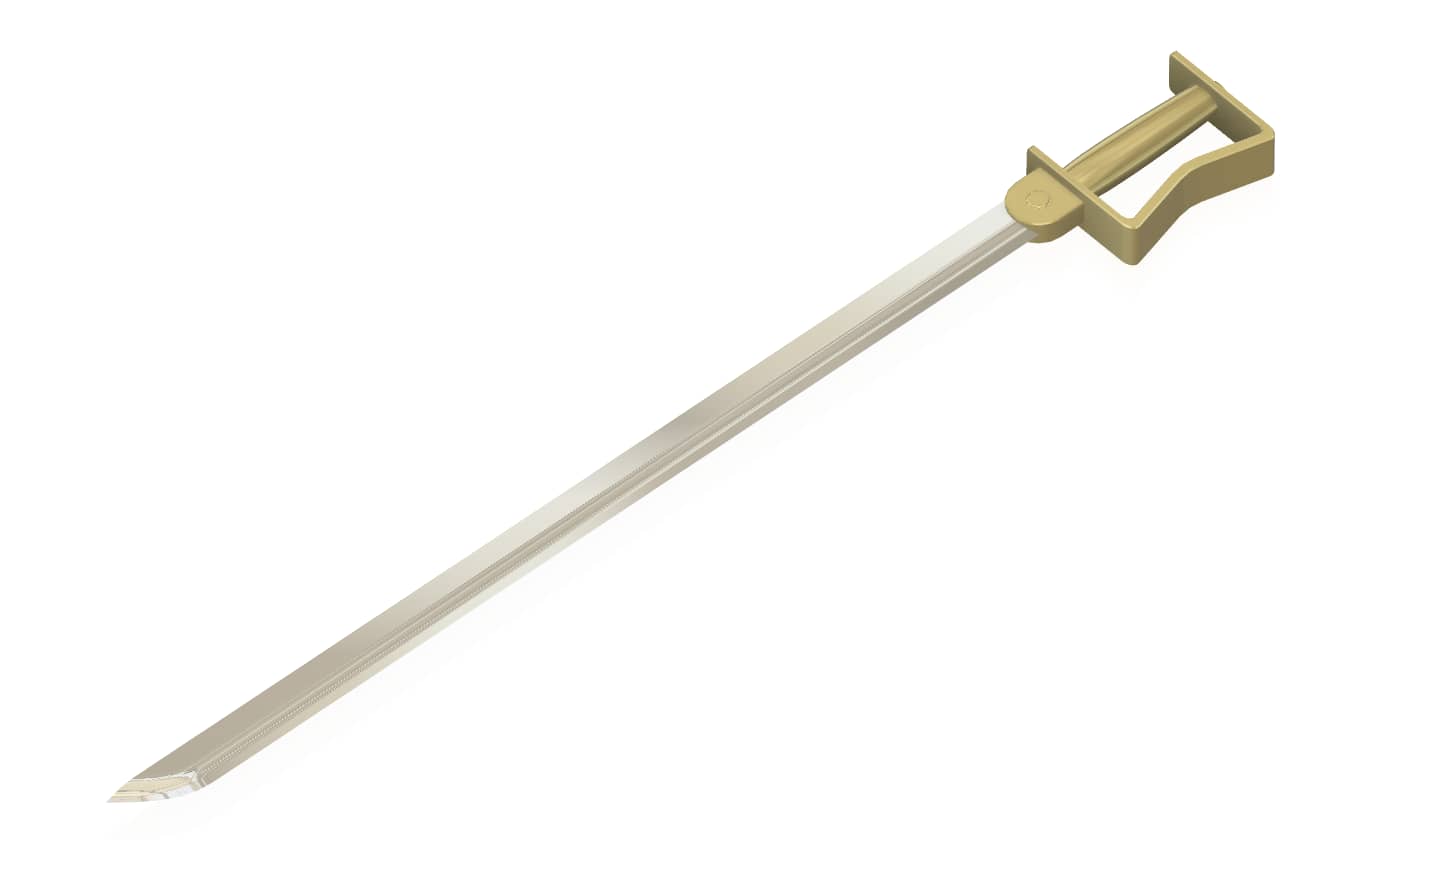 Render of Wrath's sword from FMAB